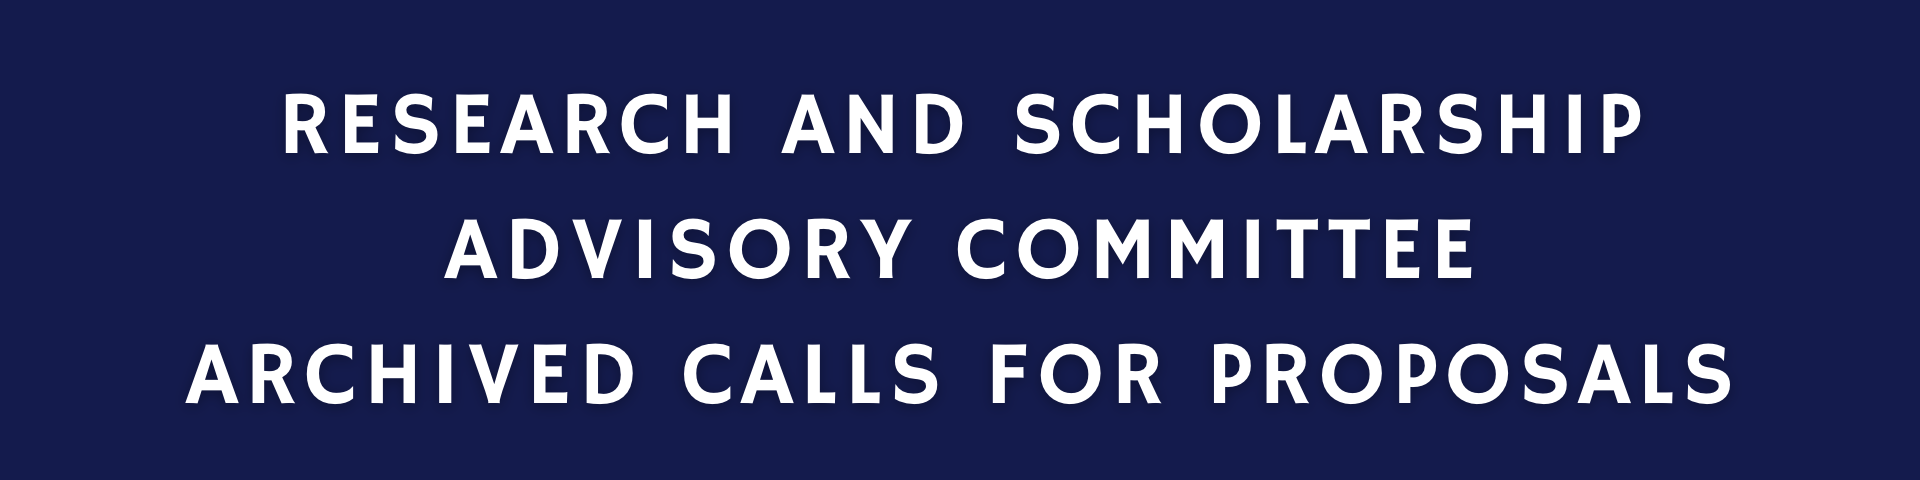 blue banner with white text reading "research and scholarship advisory committee archived calls for proposals"